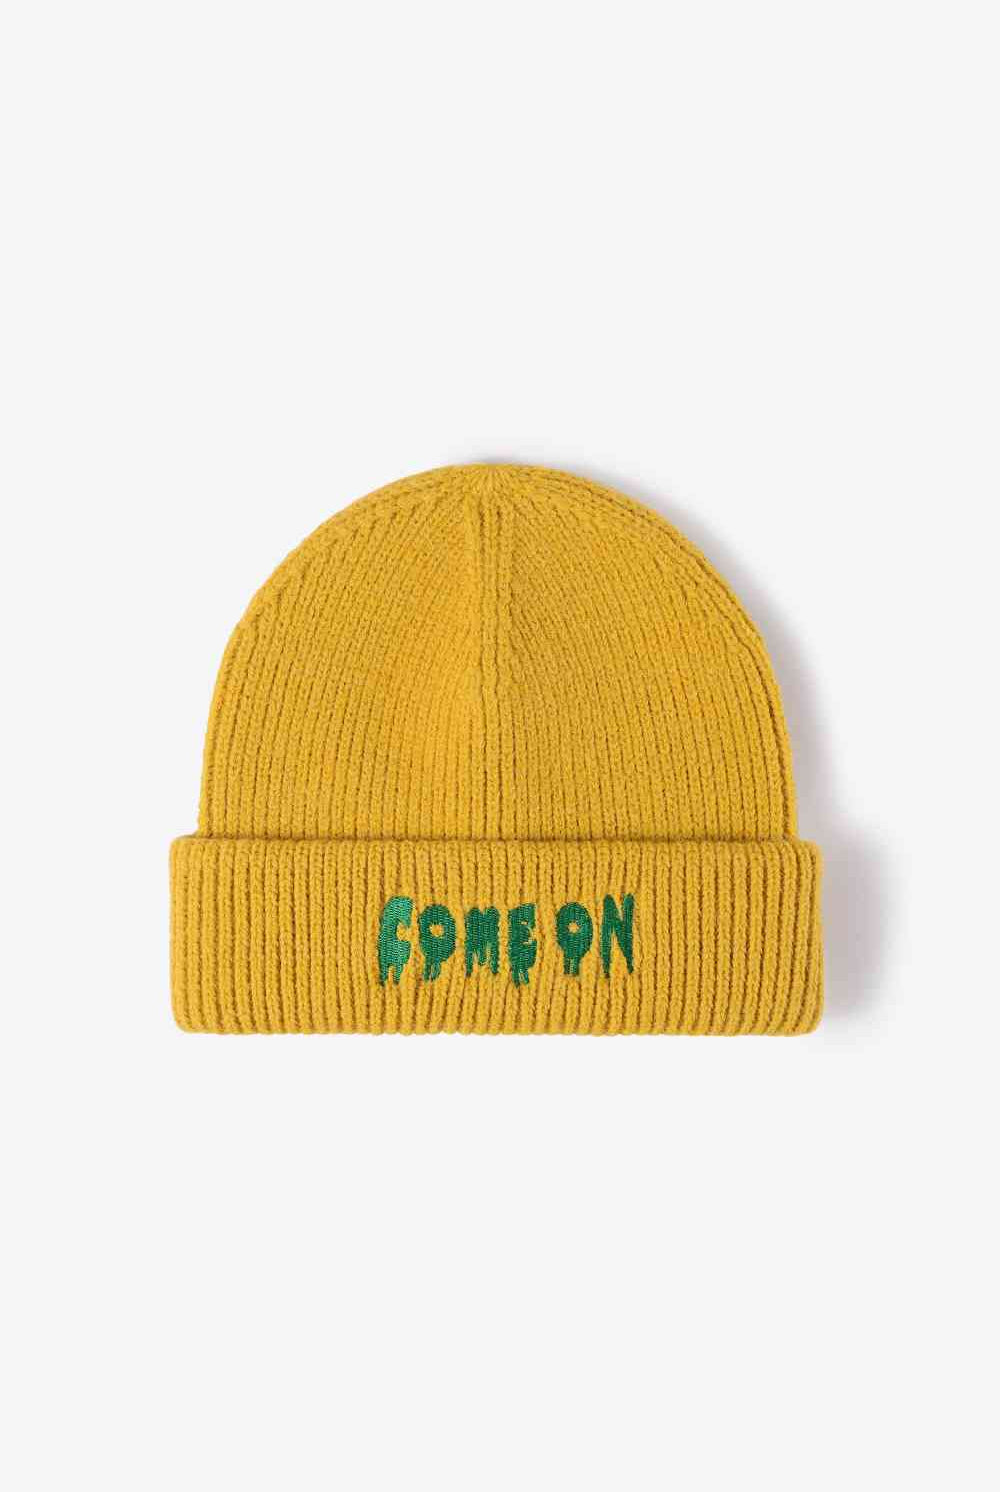 Goldenrod COME ON Embroidered Cuff Knit Beanie Winter Accessories